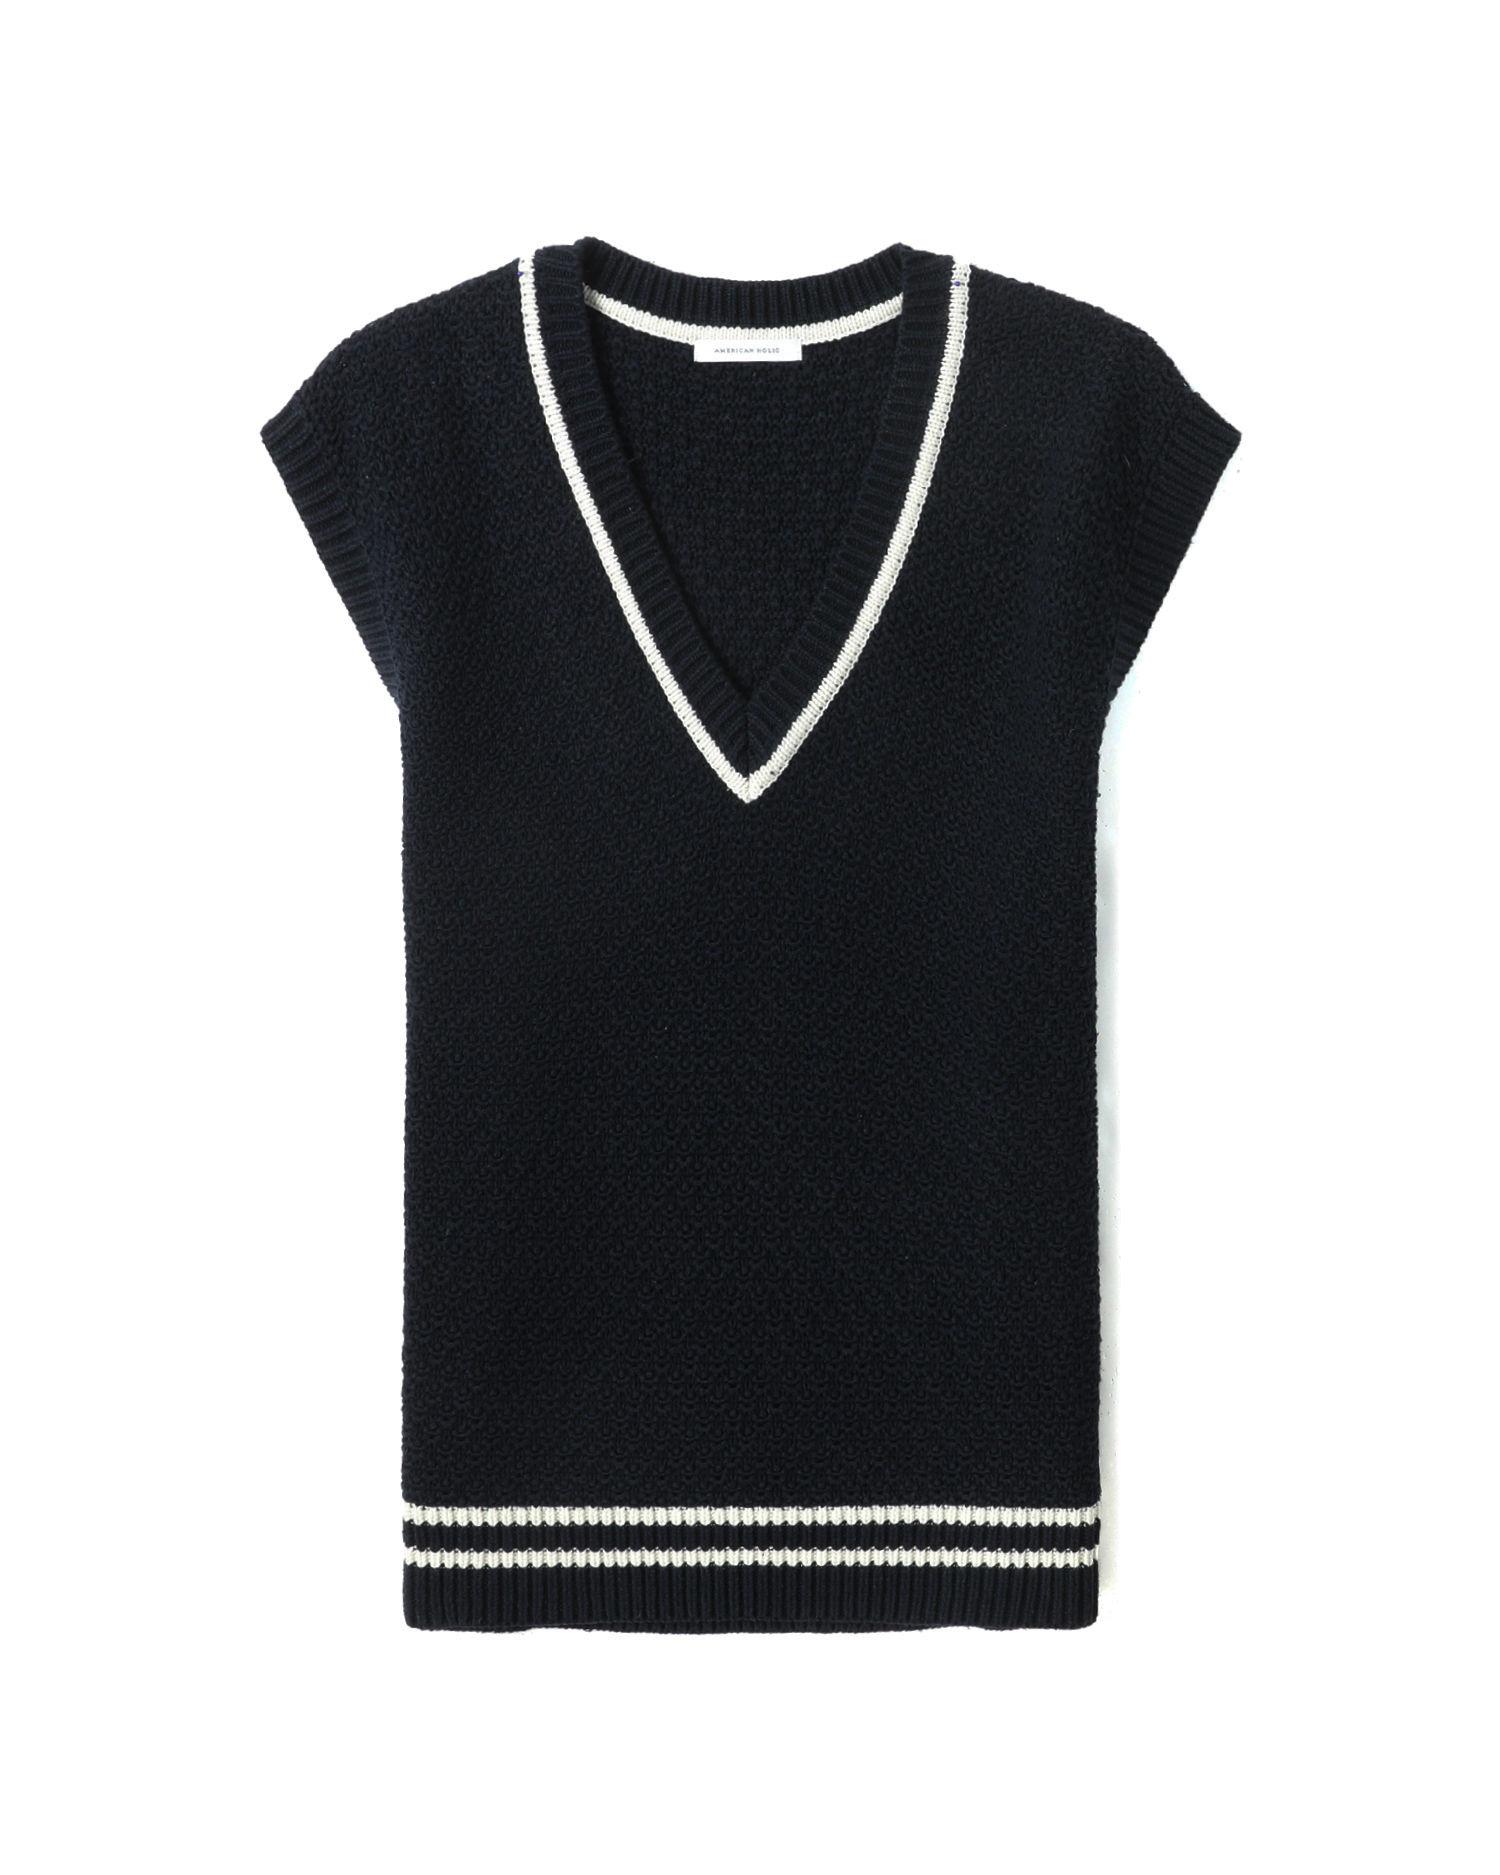 Relaxed V-neck vest by AMERICAN HOLIC